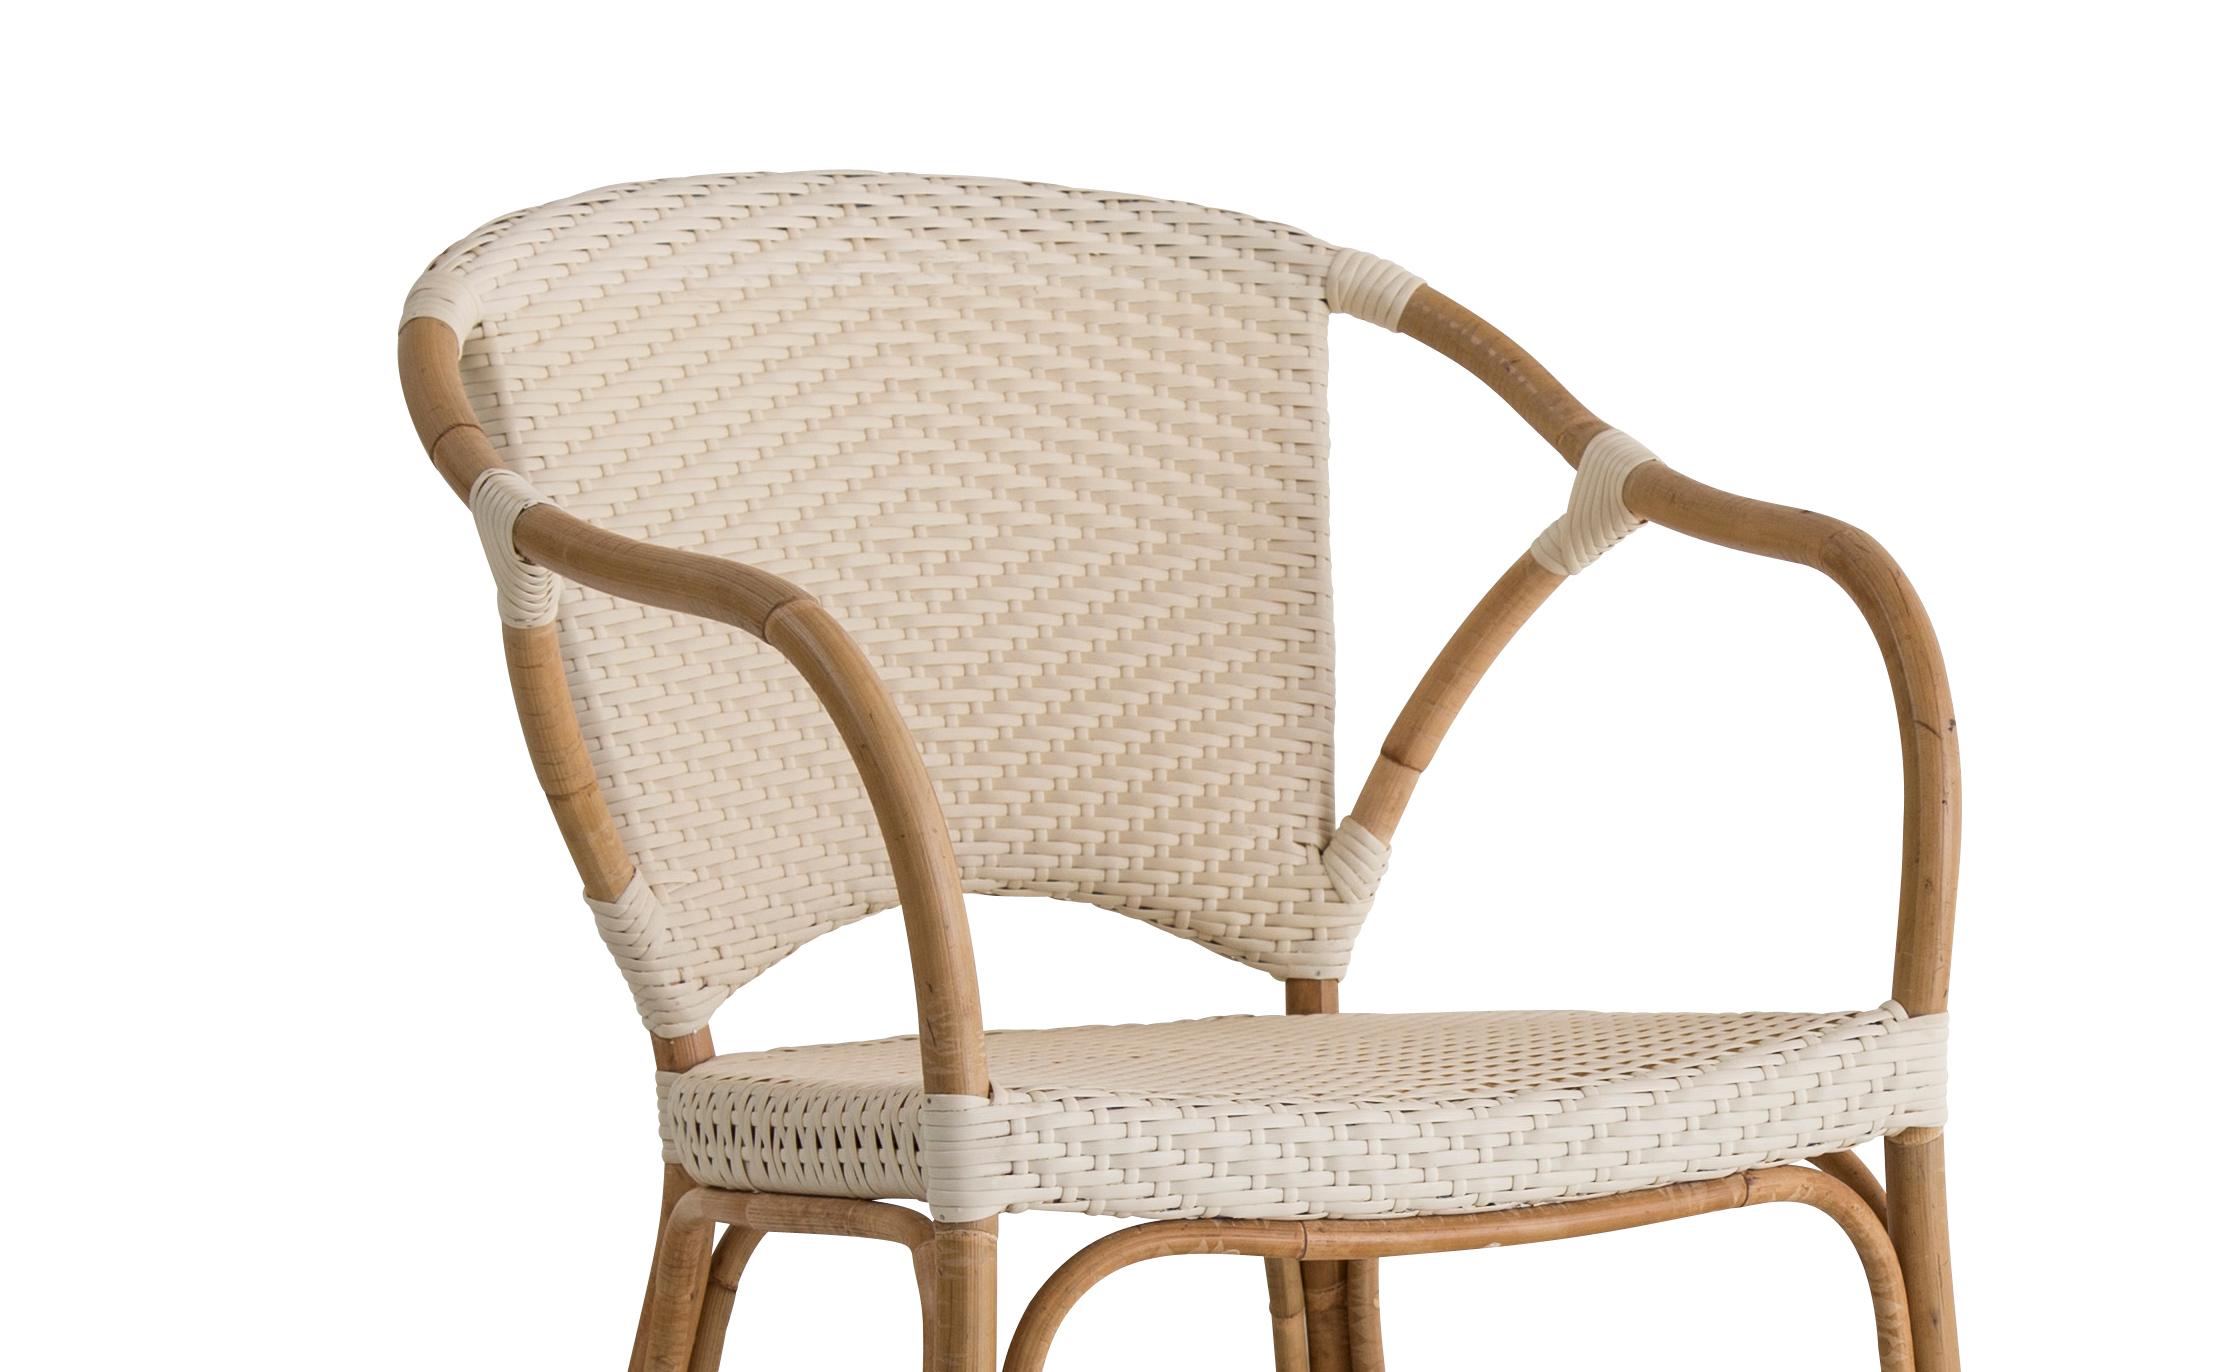 Affäire is designed for the upper end cafés, brasseries and restaurants in historical European cities and capitals all-over the world. An elegant choice for Rivieras and sidewalk cafés, our handcrafted Affäire café chairs, stools and tables bring